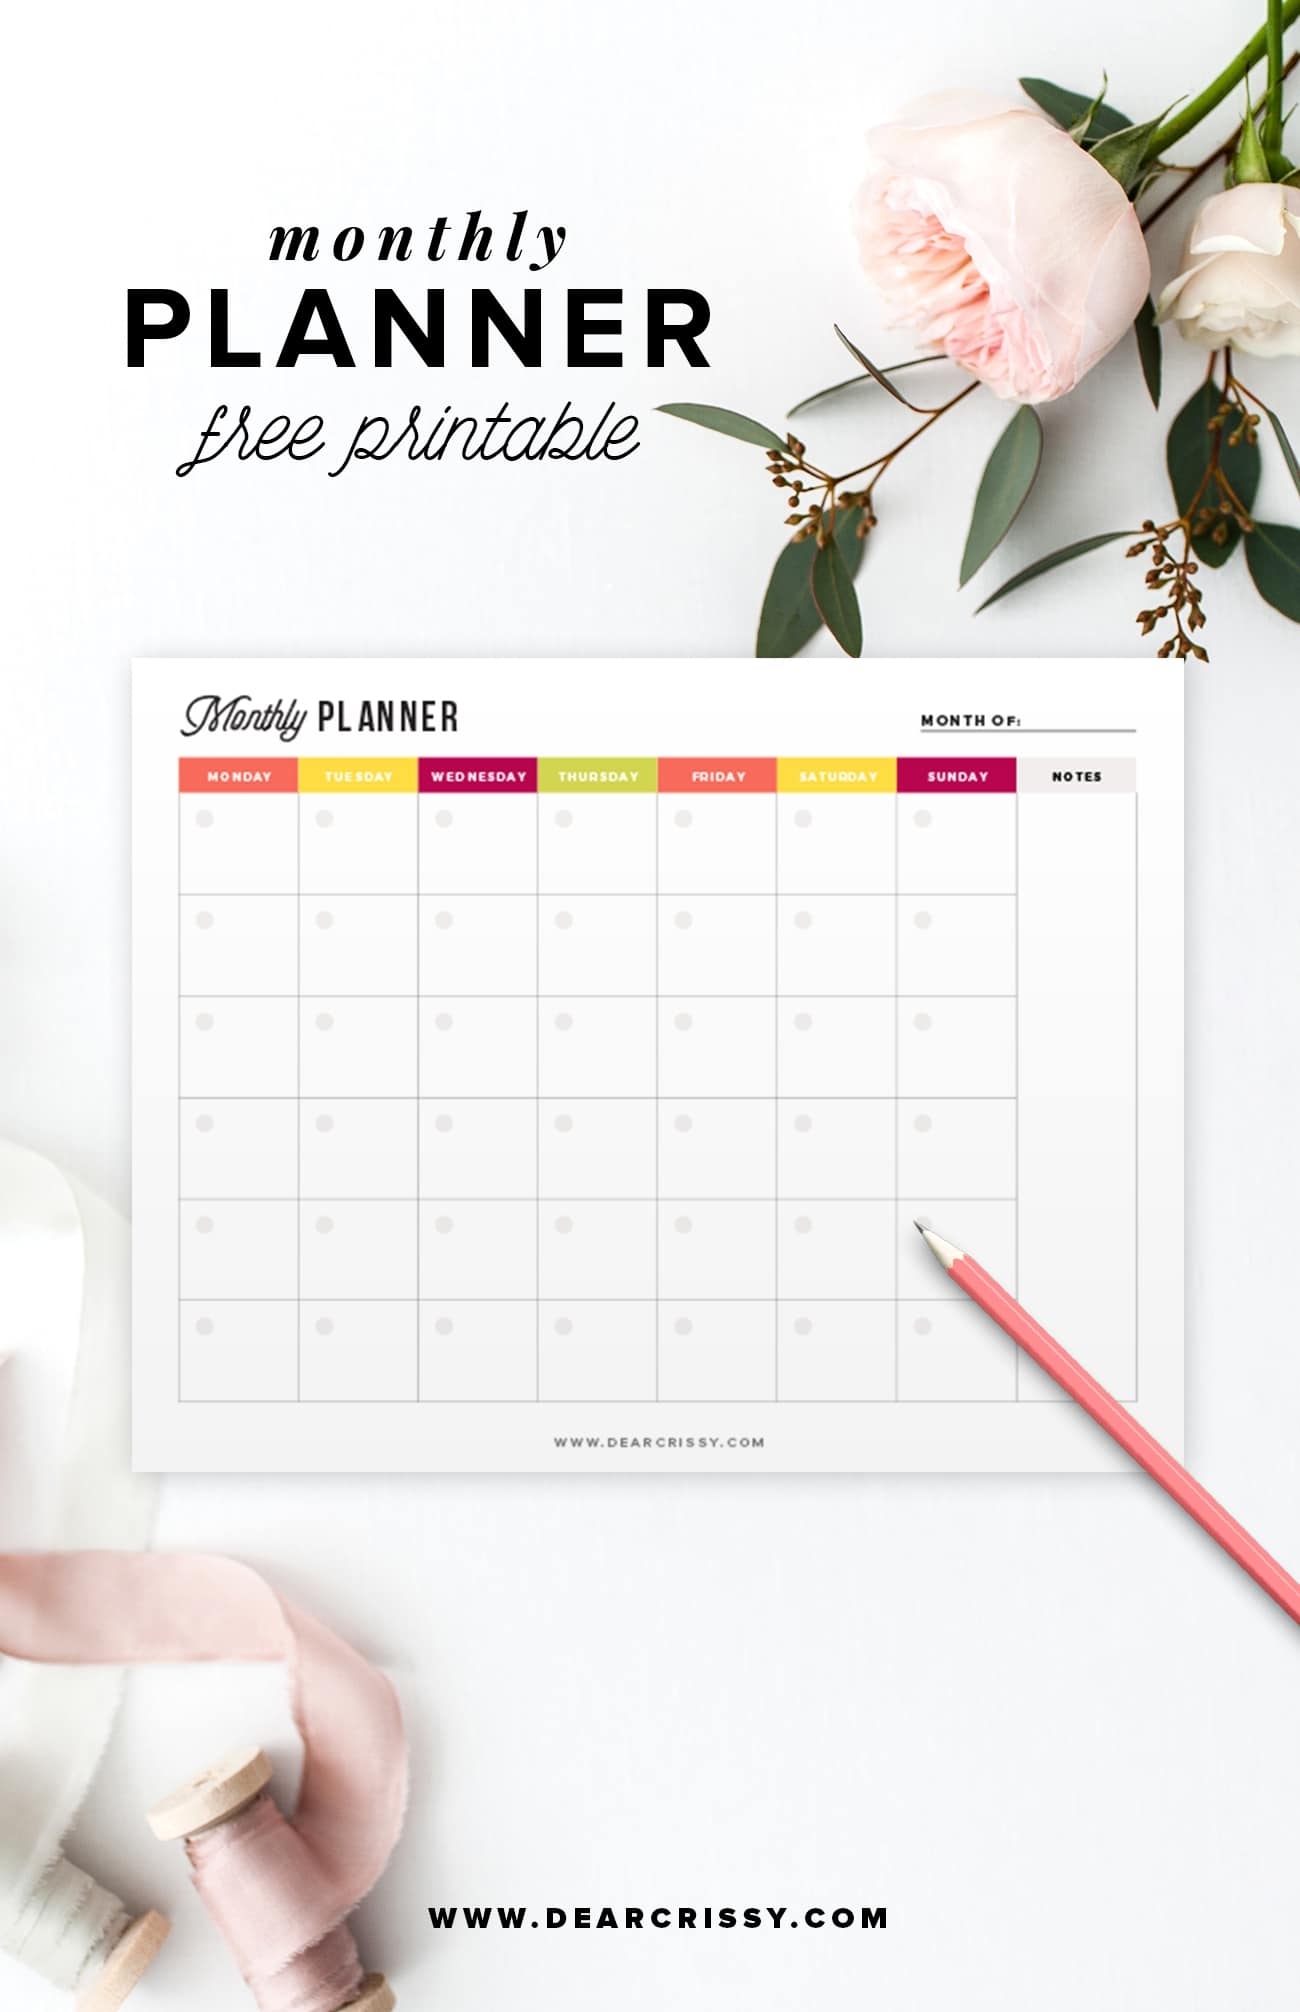 Free Printable Monthly Planner - Start Planning Your Month